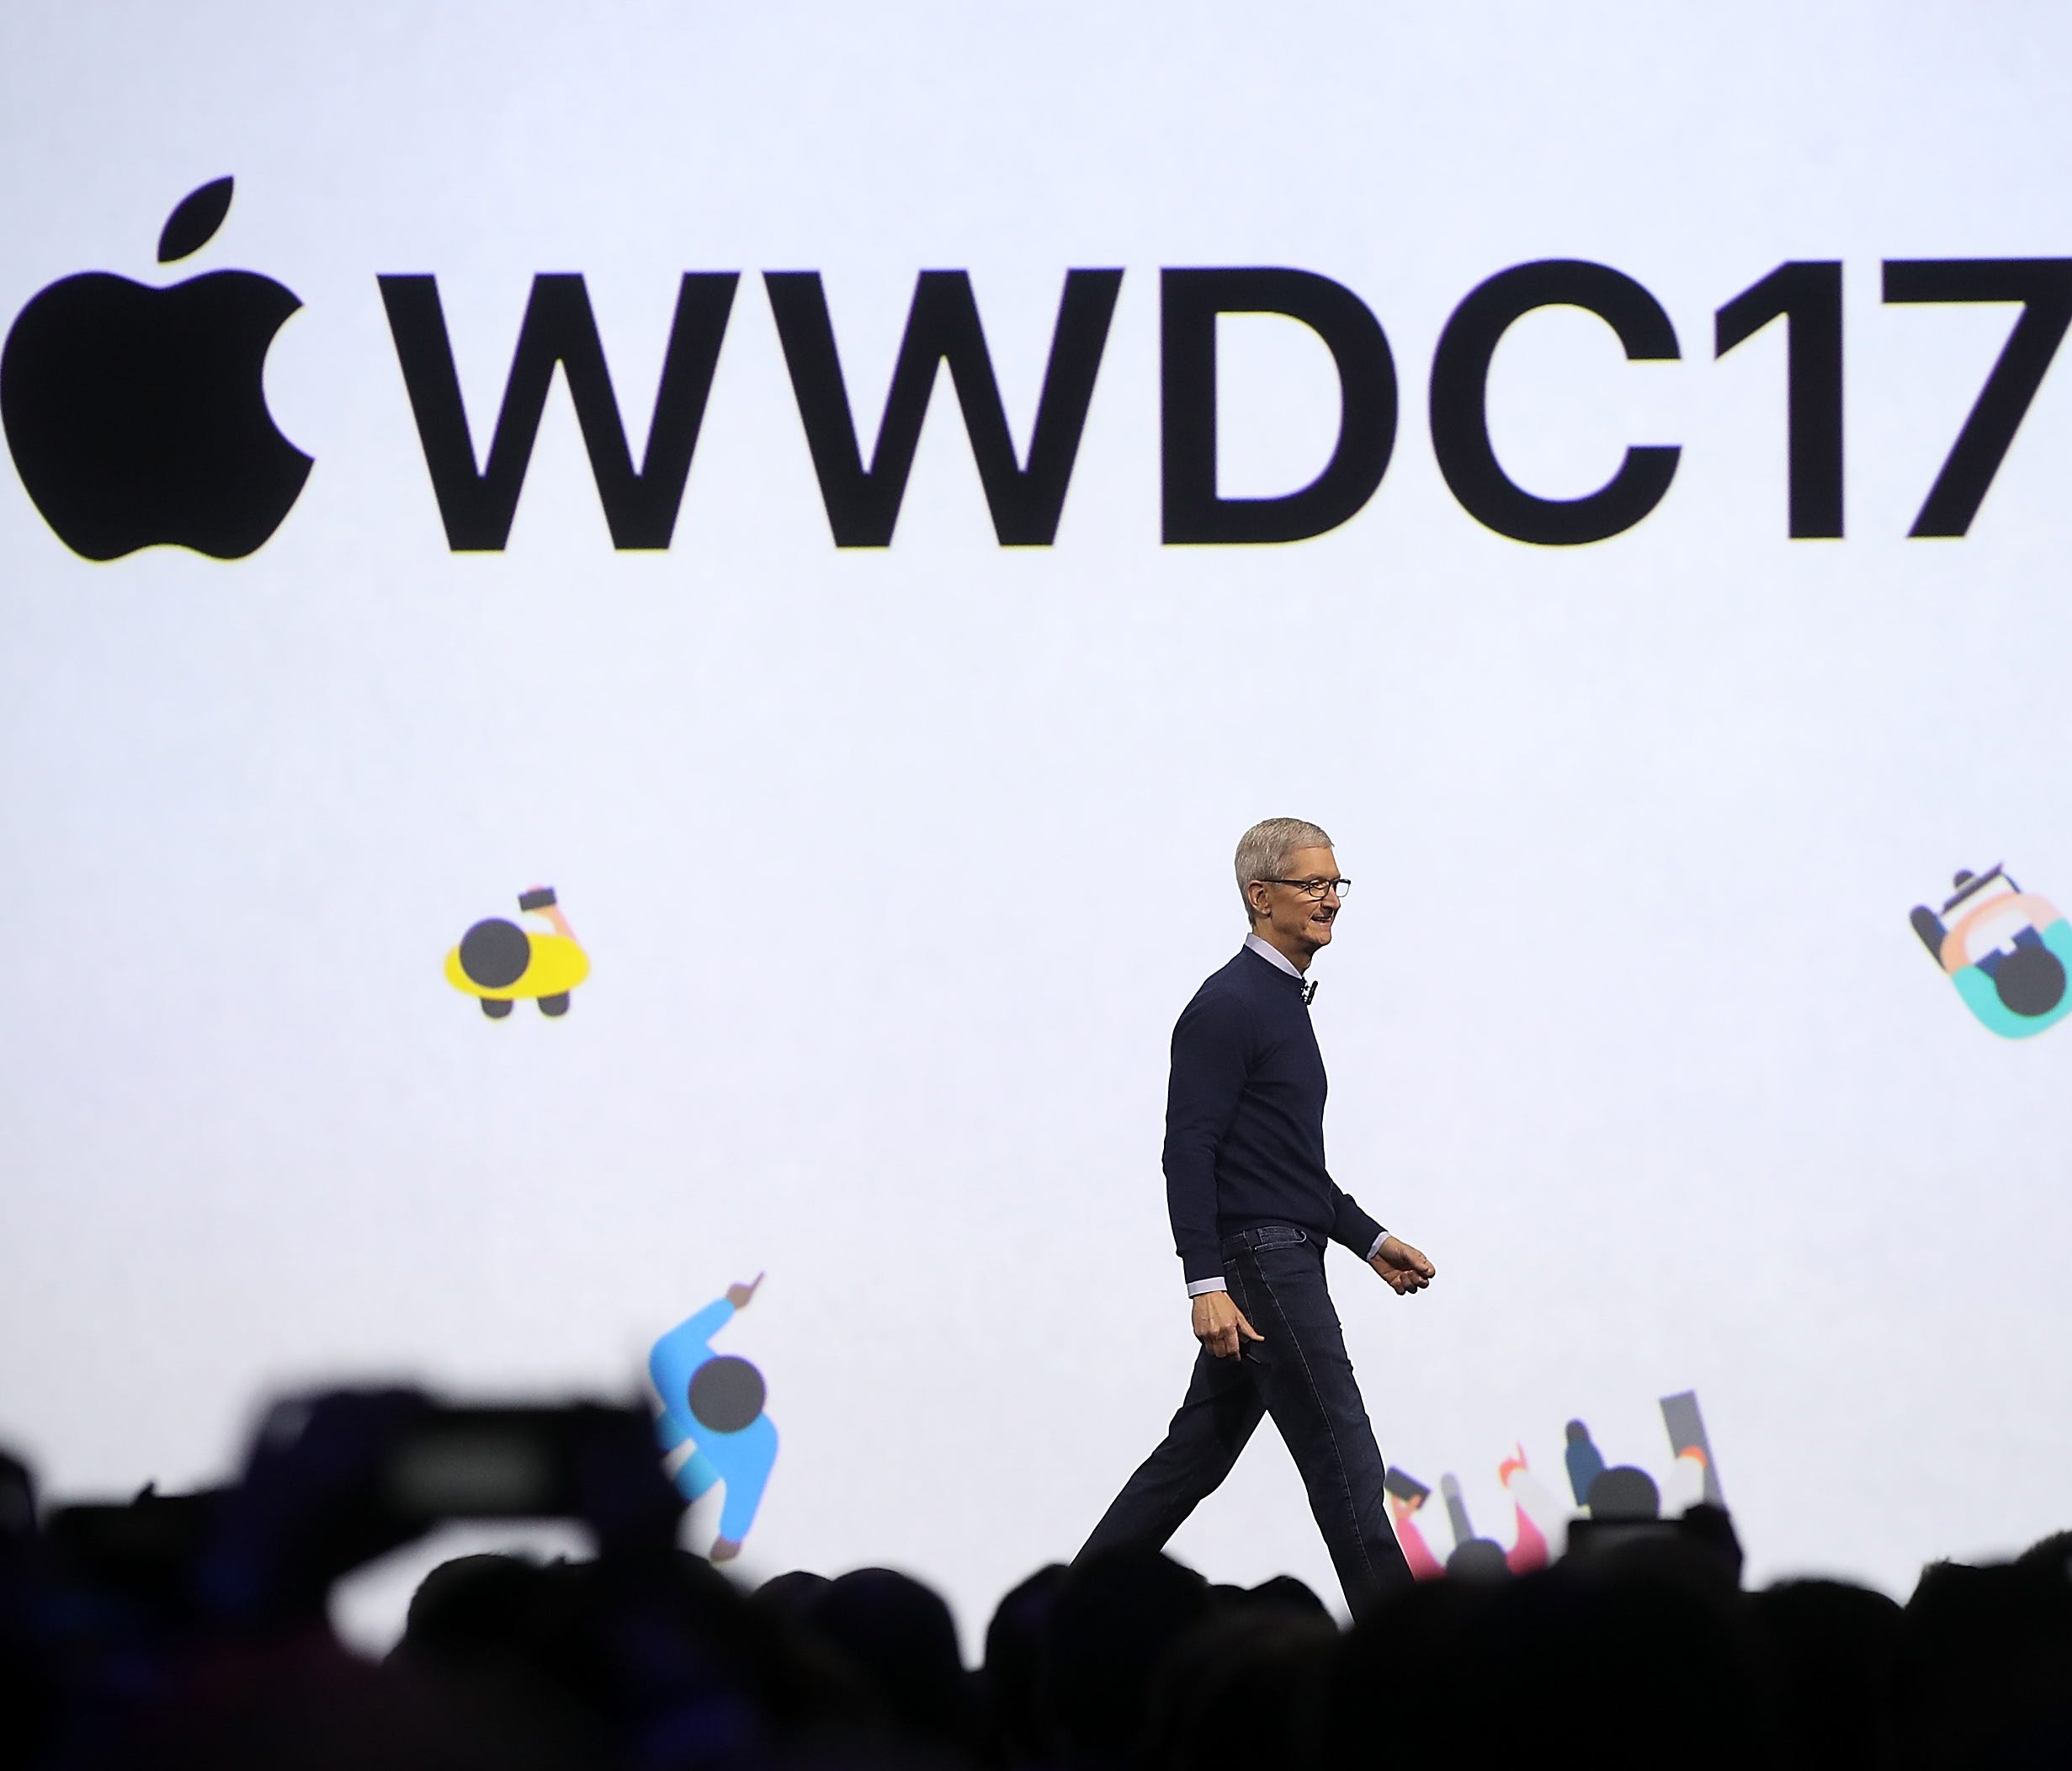 Apple CEO Tim Cook walks on stage to deliver the opening keynote address at the 2017 Apple Worldwide Developer Conference (WWDC) at the San Jose Convention Center on June 5, 2017, in San Jose, California. Apple CEO Tim Cook kicked off the five-day WW